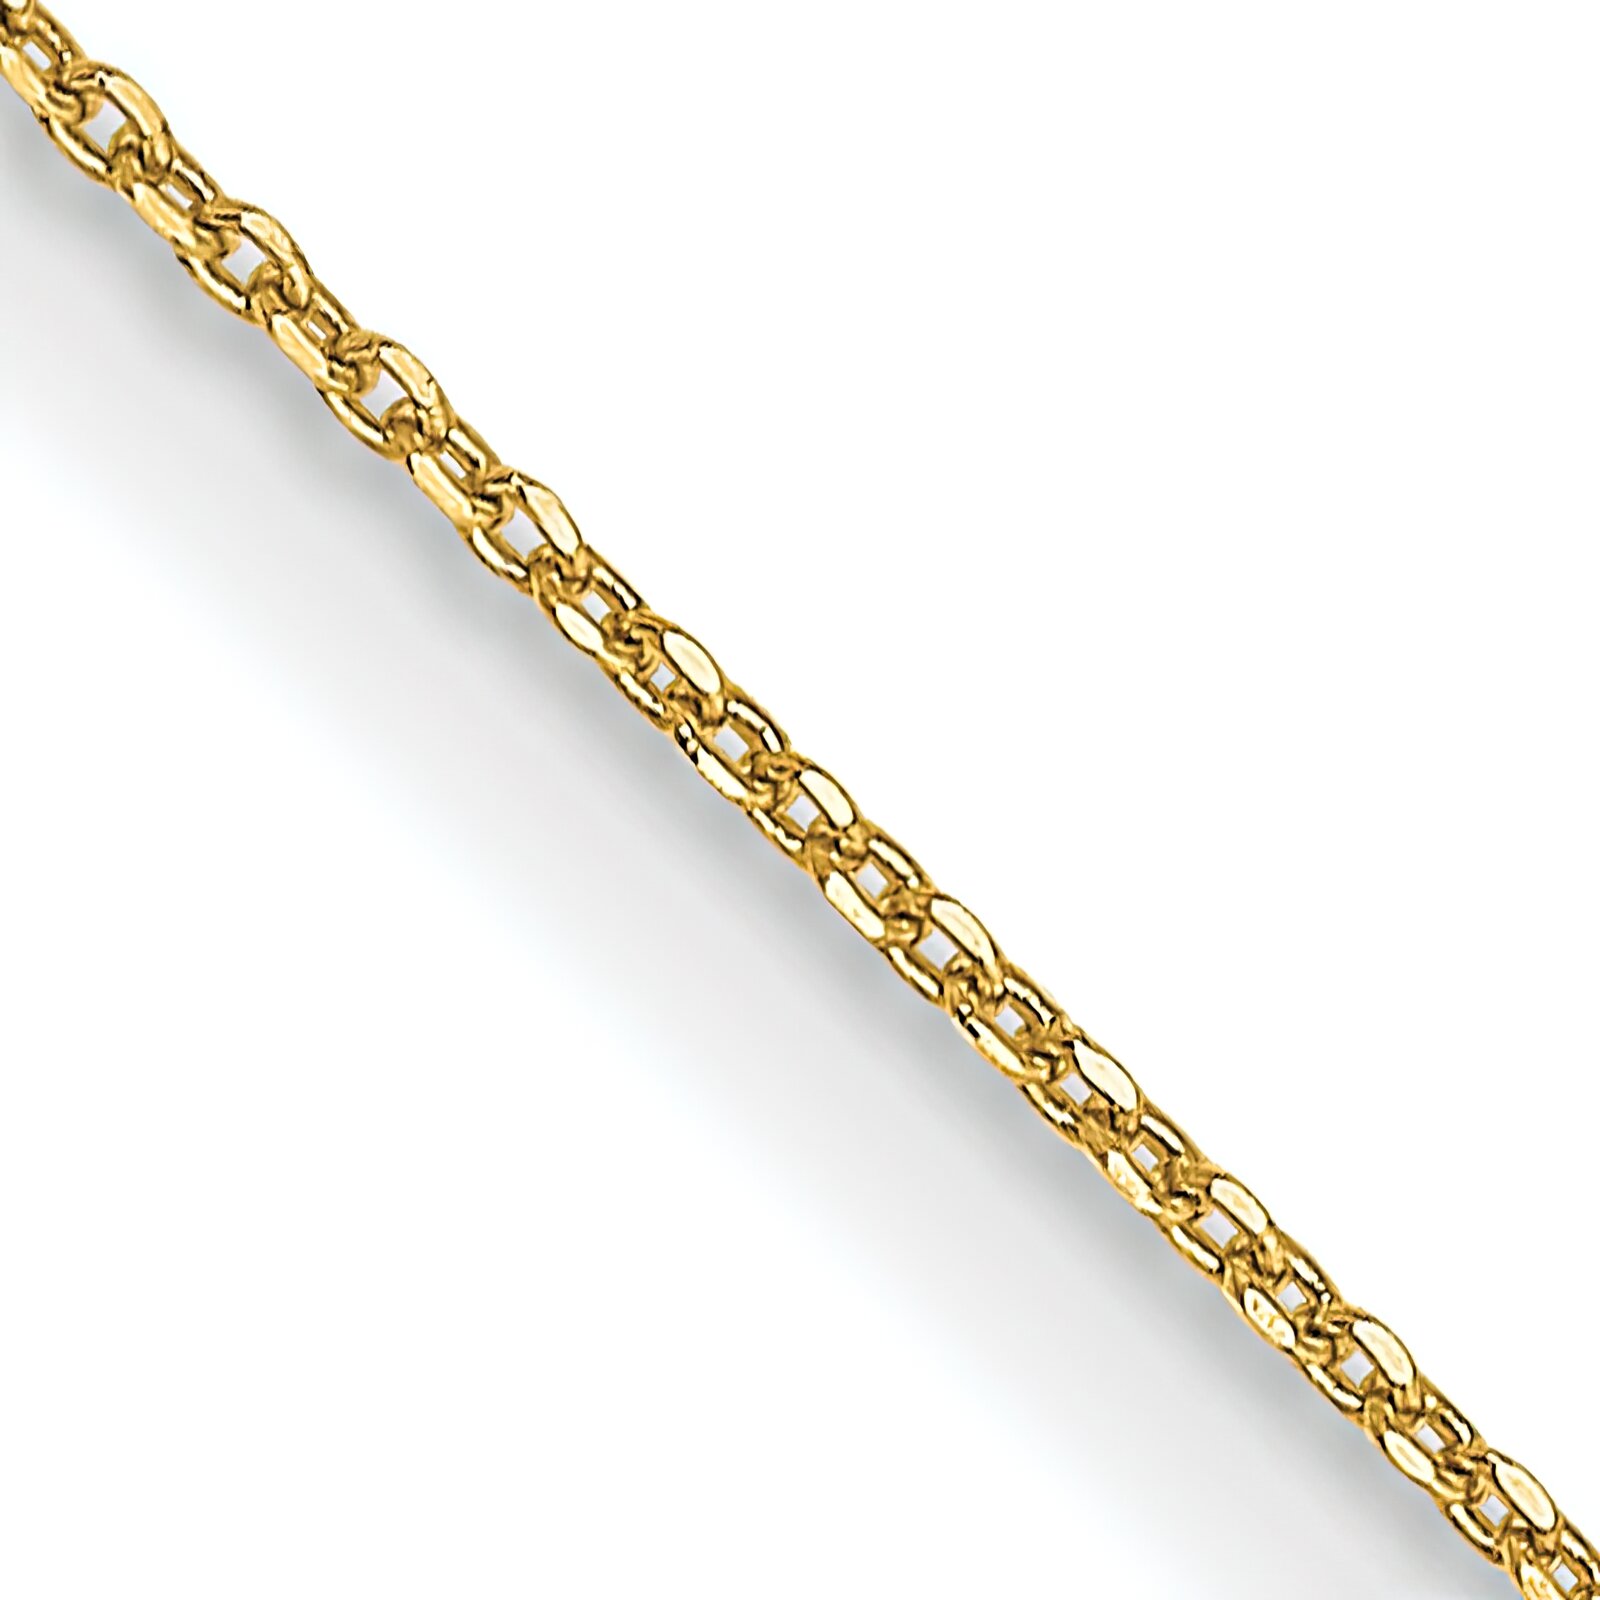 Findingking 14K Gold .6mm Cable Chain Jewelry 24" FindingKing